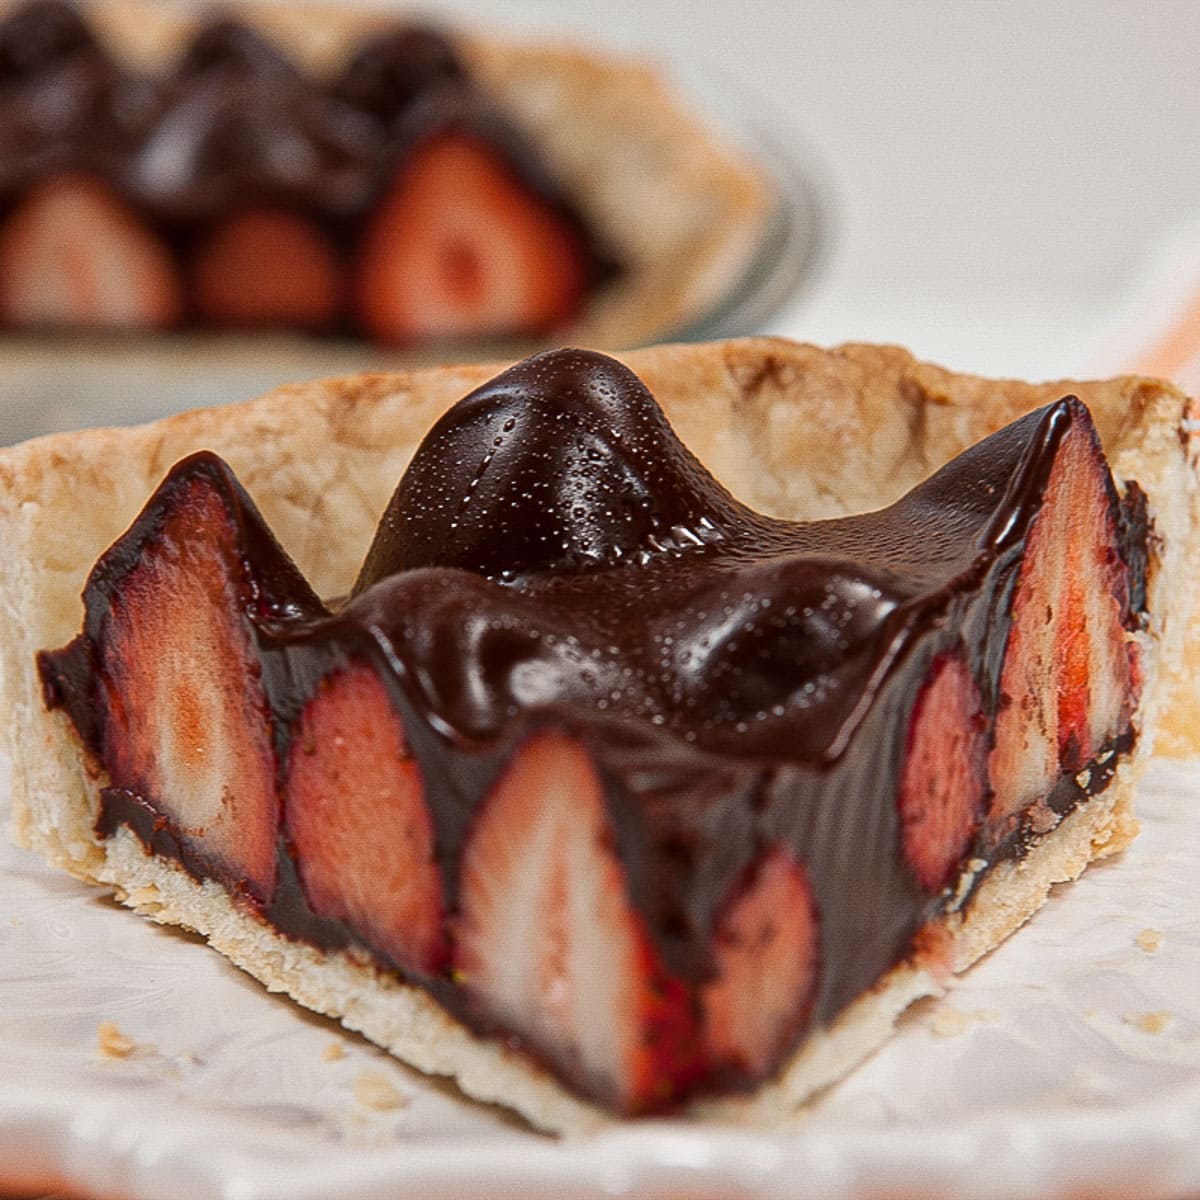  A slice of the Chocolate Strawberry Pie on a white plate.